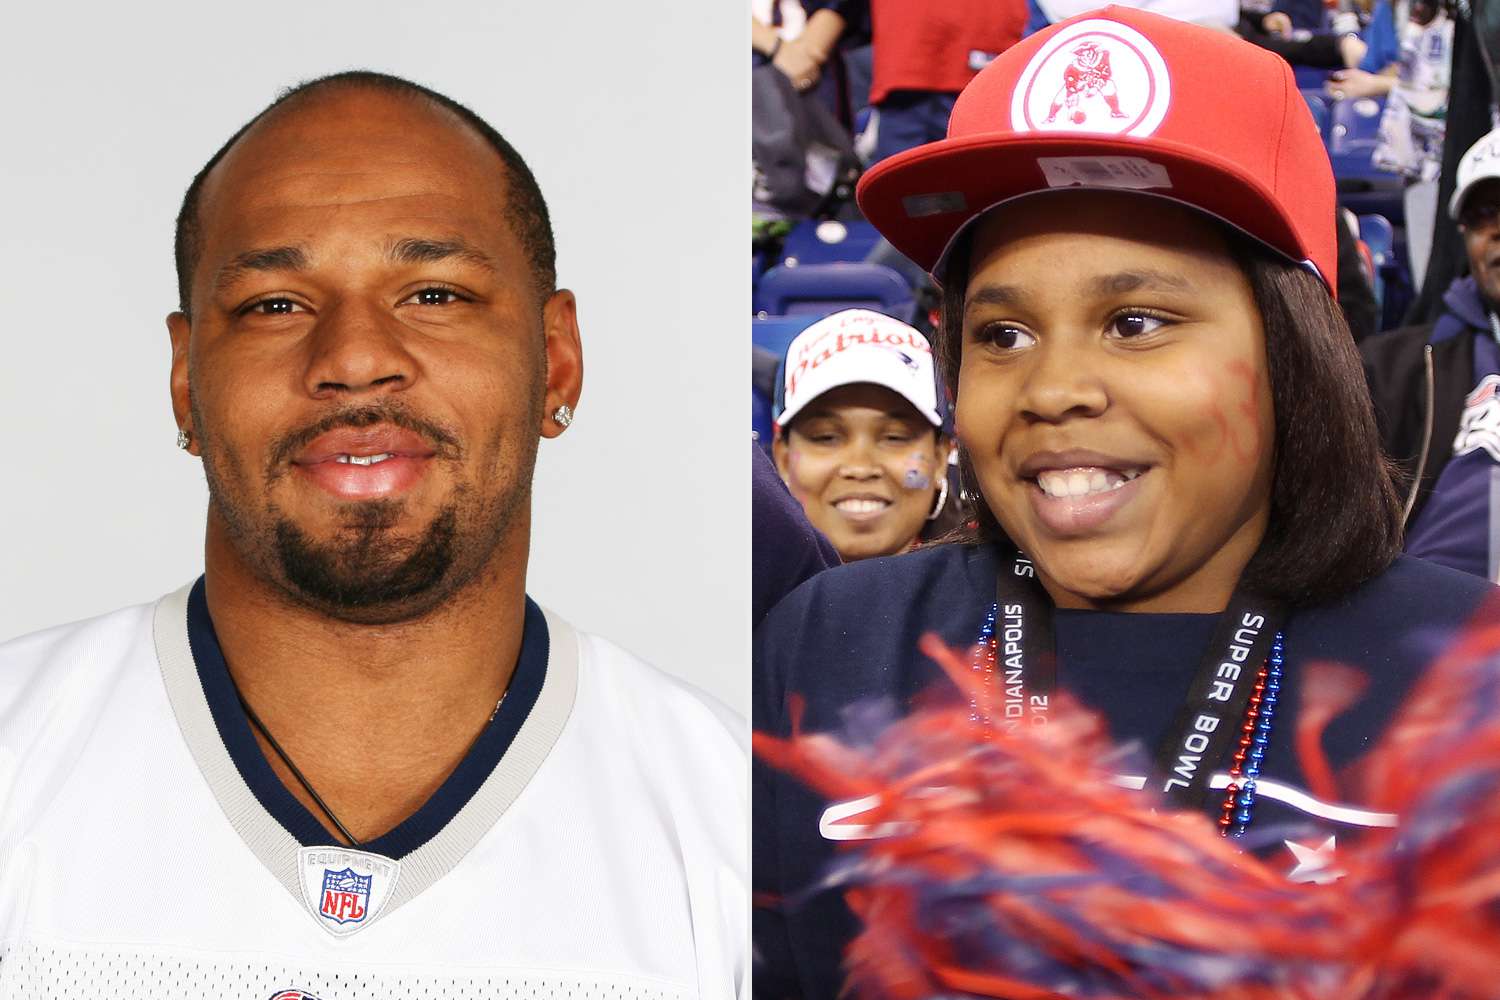 Daughter of Three-Time Super Bowl Champion Kevin Faulk Dies at 19